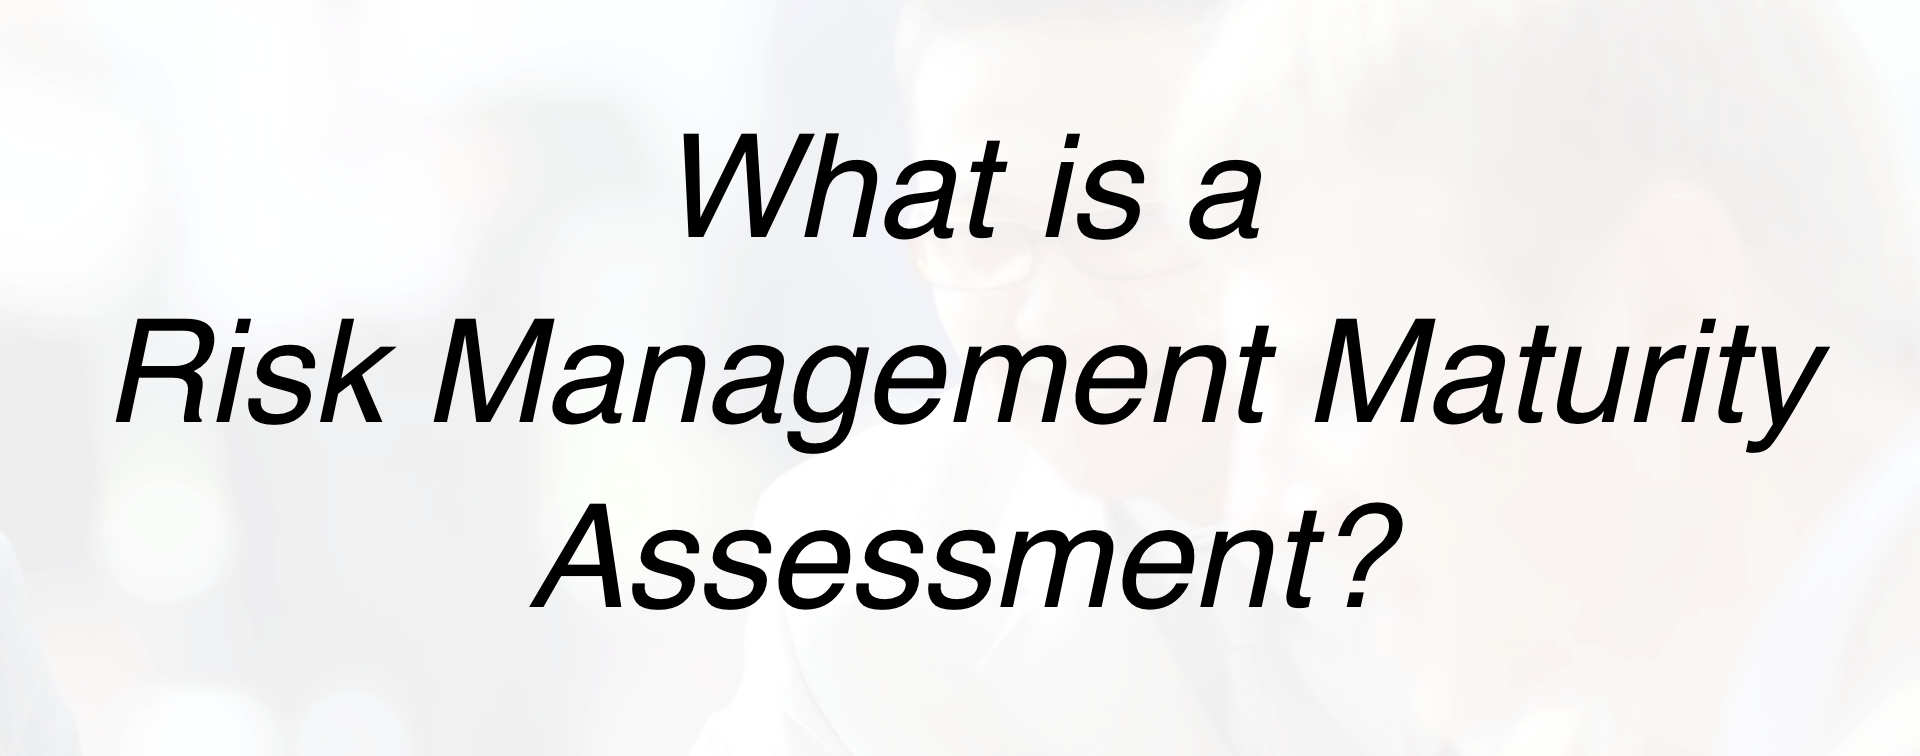 What is a Risk Management Maturity Assessment